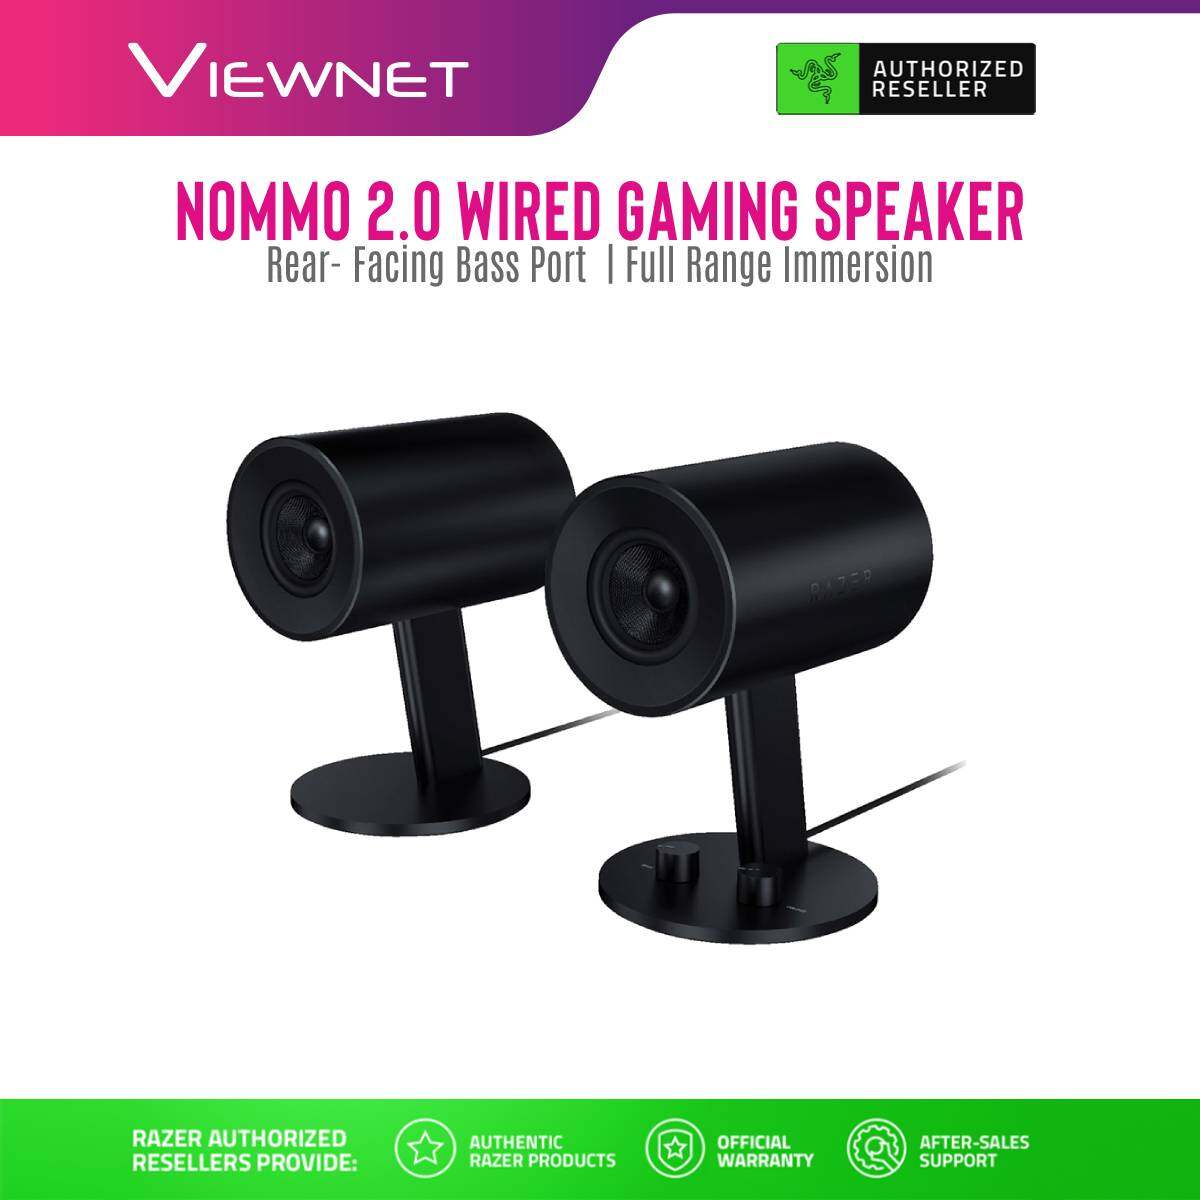 Razer 2.0 Nommo Gaming Speaker (RZ05-02450100-R3W1), 3.5mm Jack, Custom Woven Glass Fiber 3-inch drivers for power and clarity.